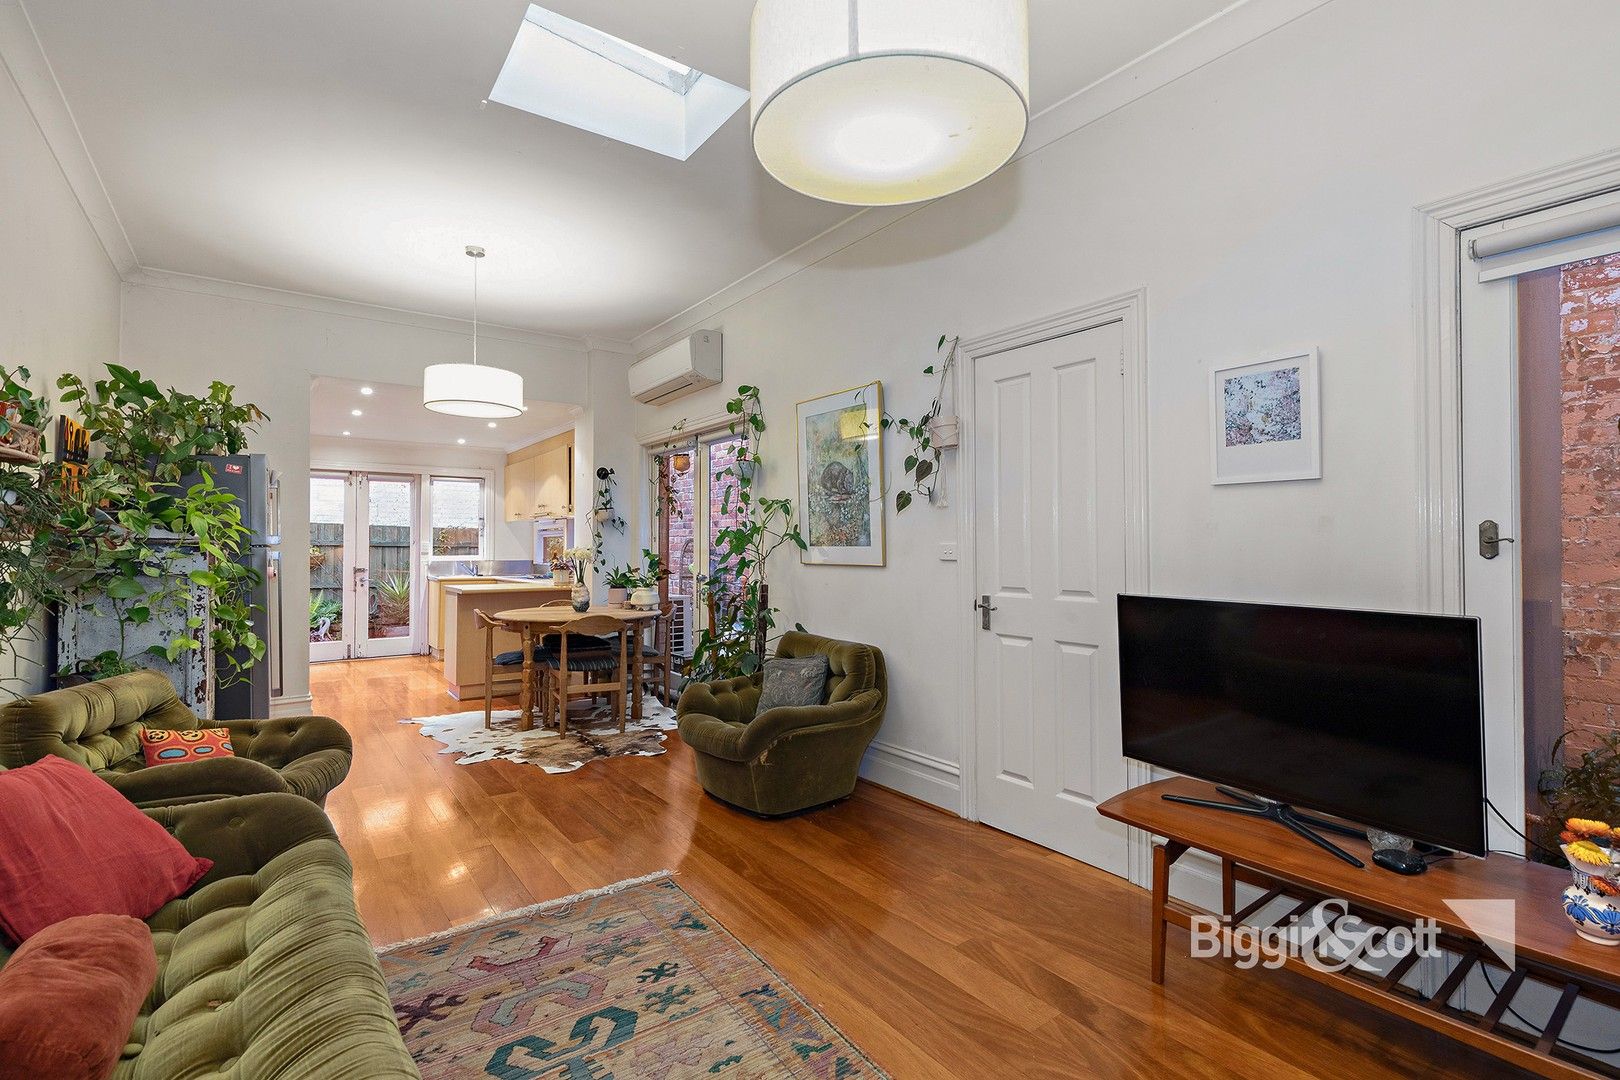 2 bedrooms House in 10 Abbotsford Street ABBOTSFORD VIC, 3067